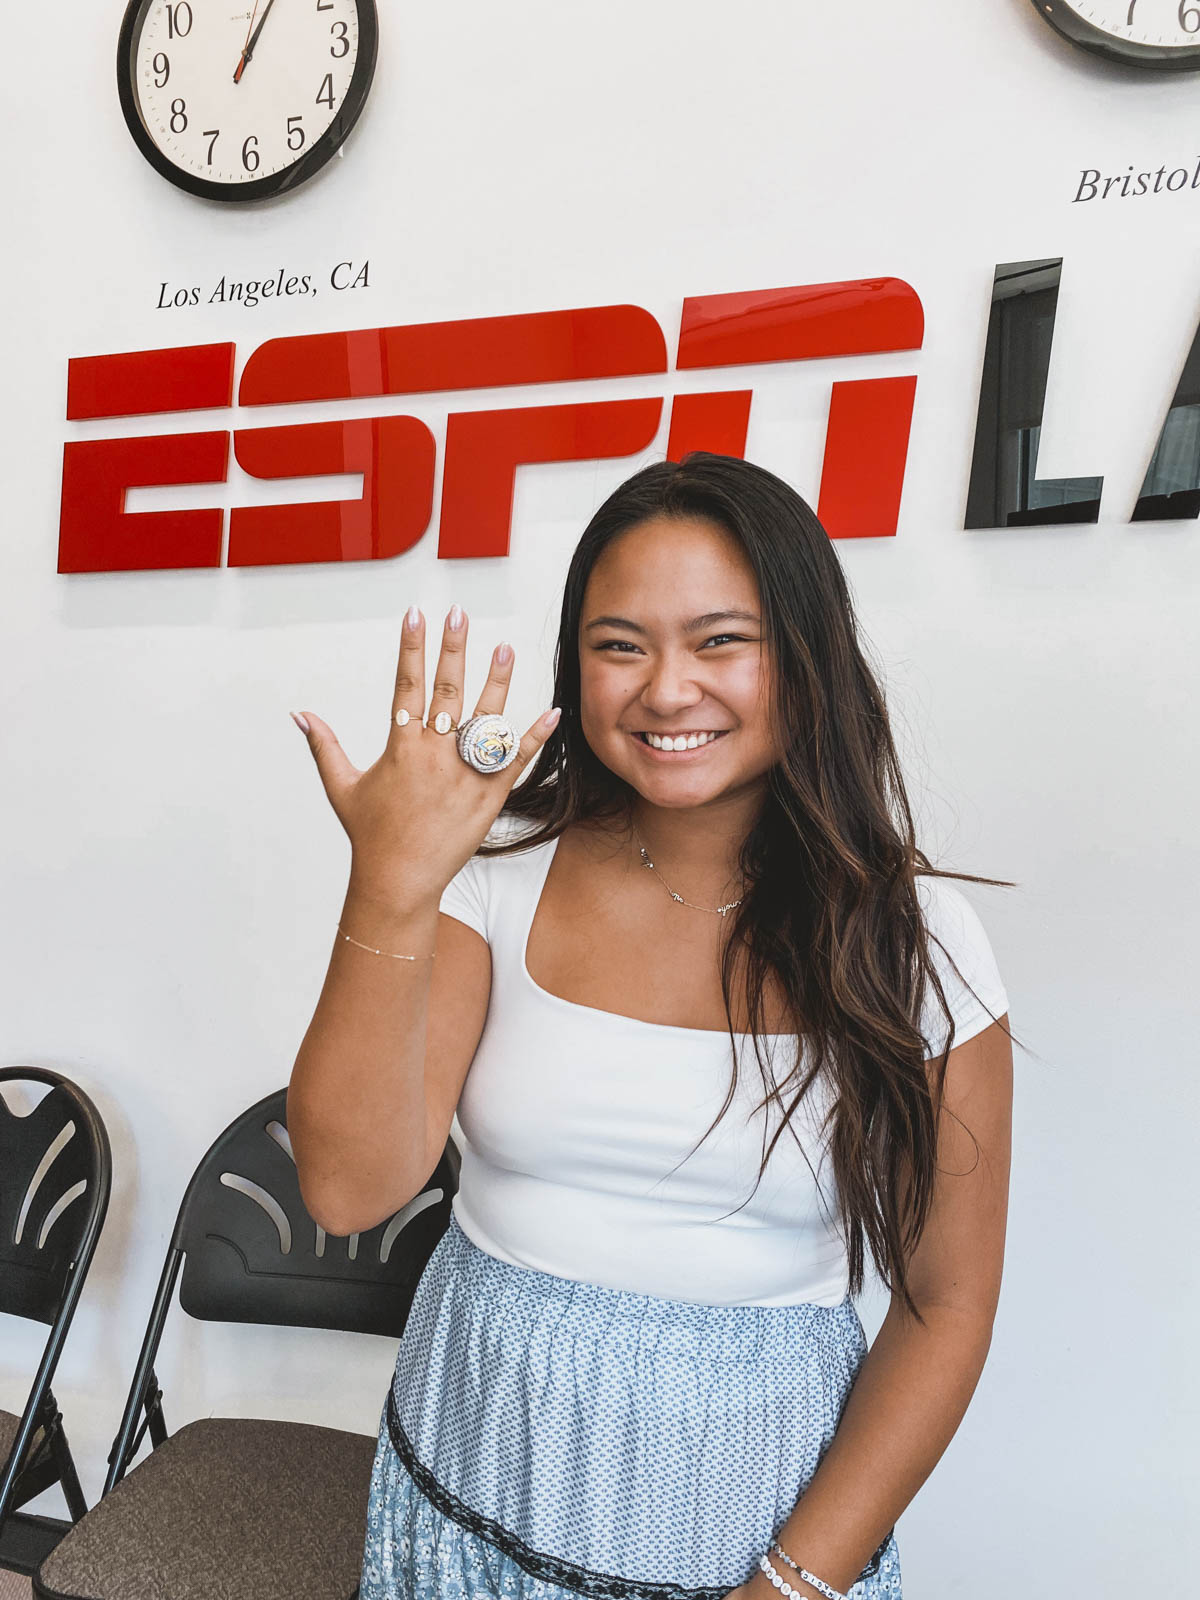 In front of a backdrop reading ESPN, Khuyen Dinh holds up her hand to display a large ring.